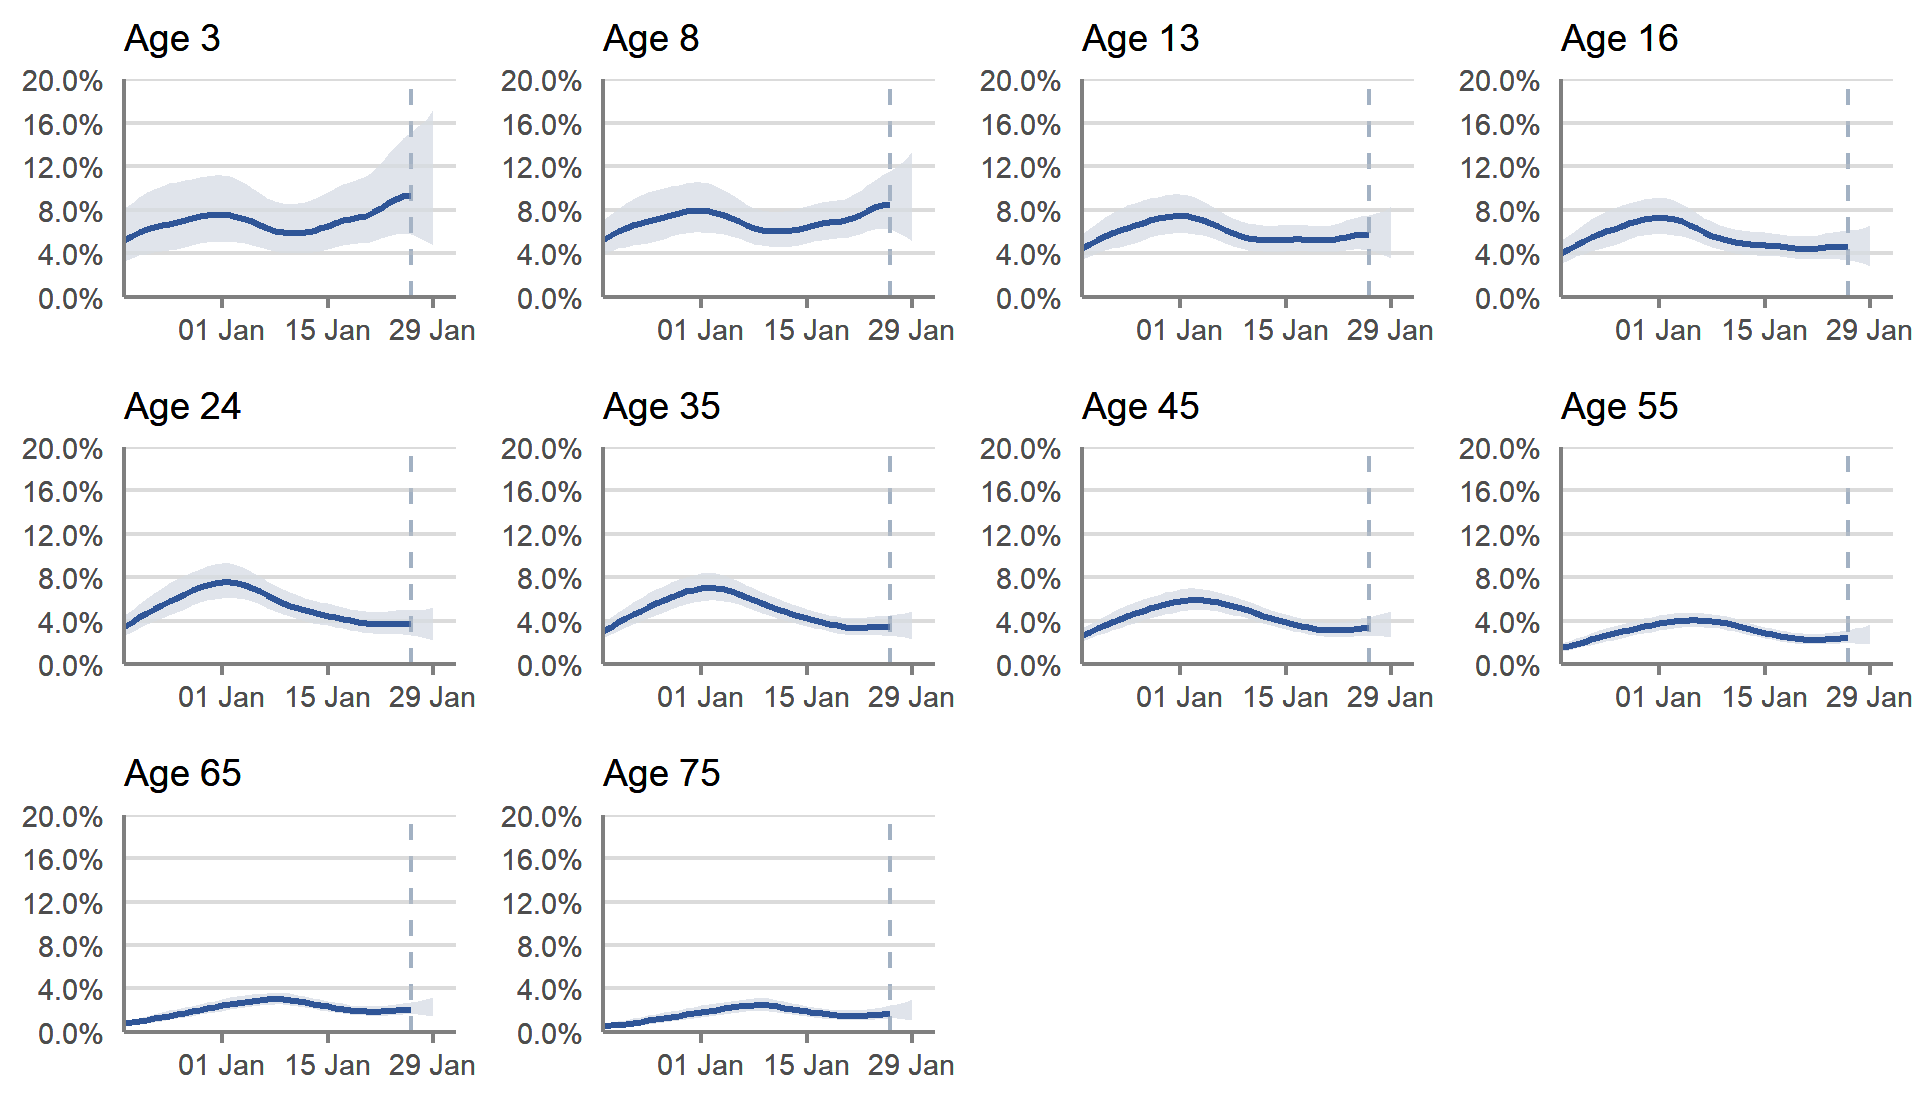 In Scotland, estimates for the percentage of people testing positive for COVID-19 in private residential households increased for primary school aged children and decreased for young adults. The trends were uncertain for secondary school ages, as well as the older ages.